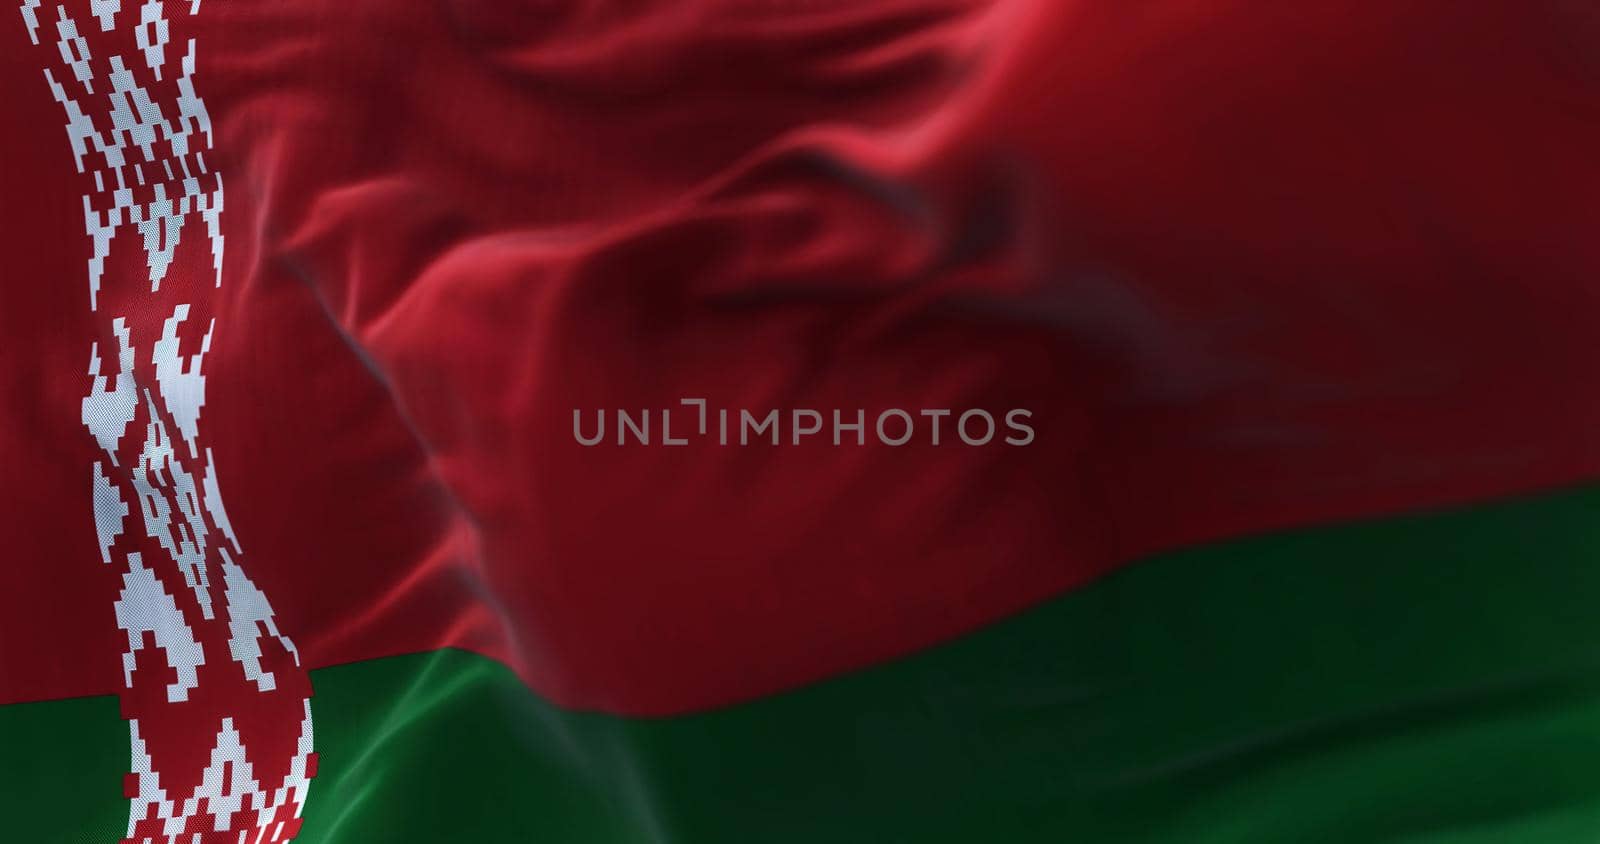 Close-up view of the belarusian national flag waving in the wind. The Republic of Belarus is a landlocked country in Eastern Europe. Fabric textured background. Selective focus